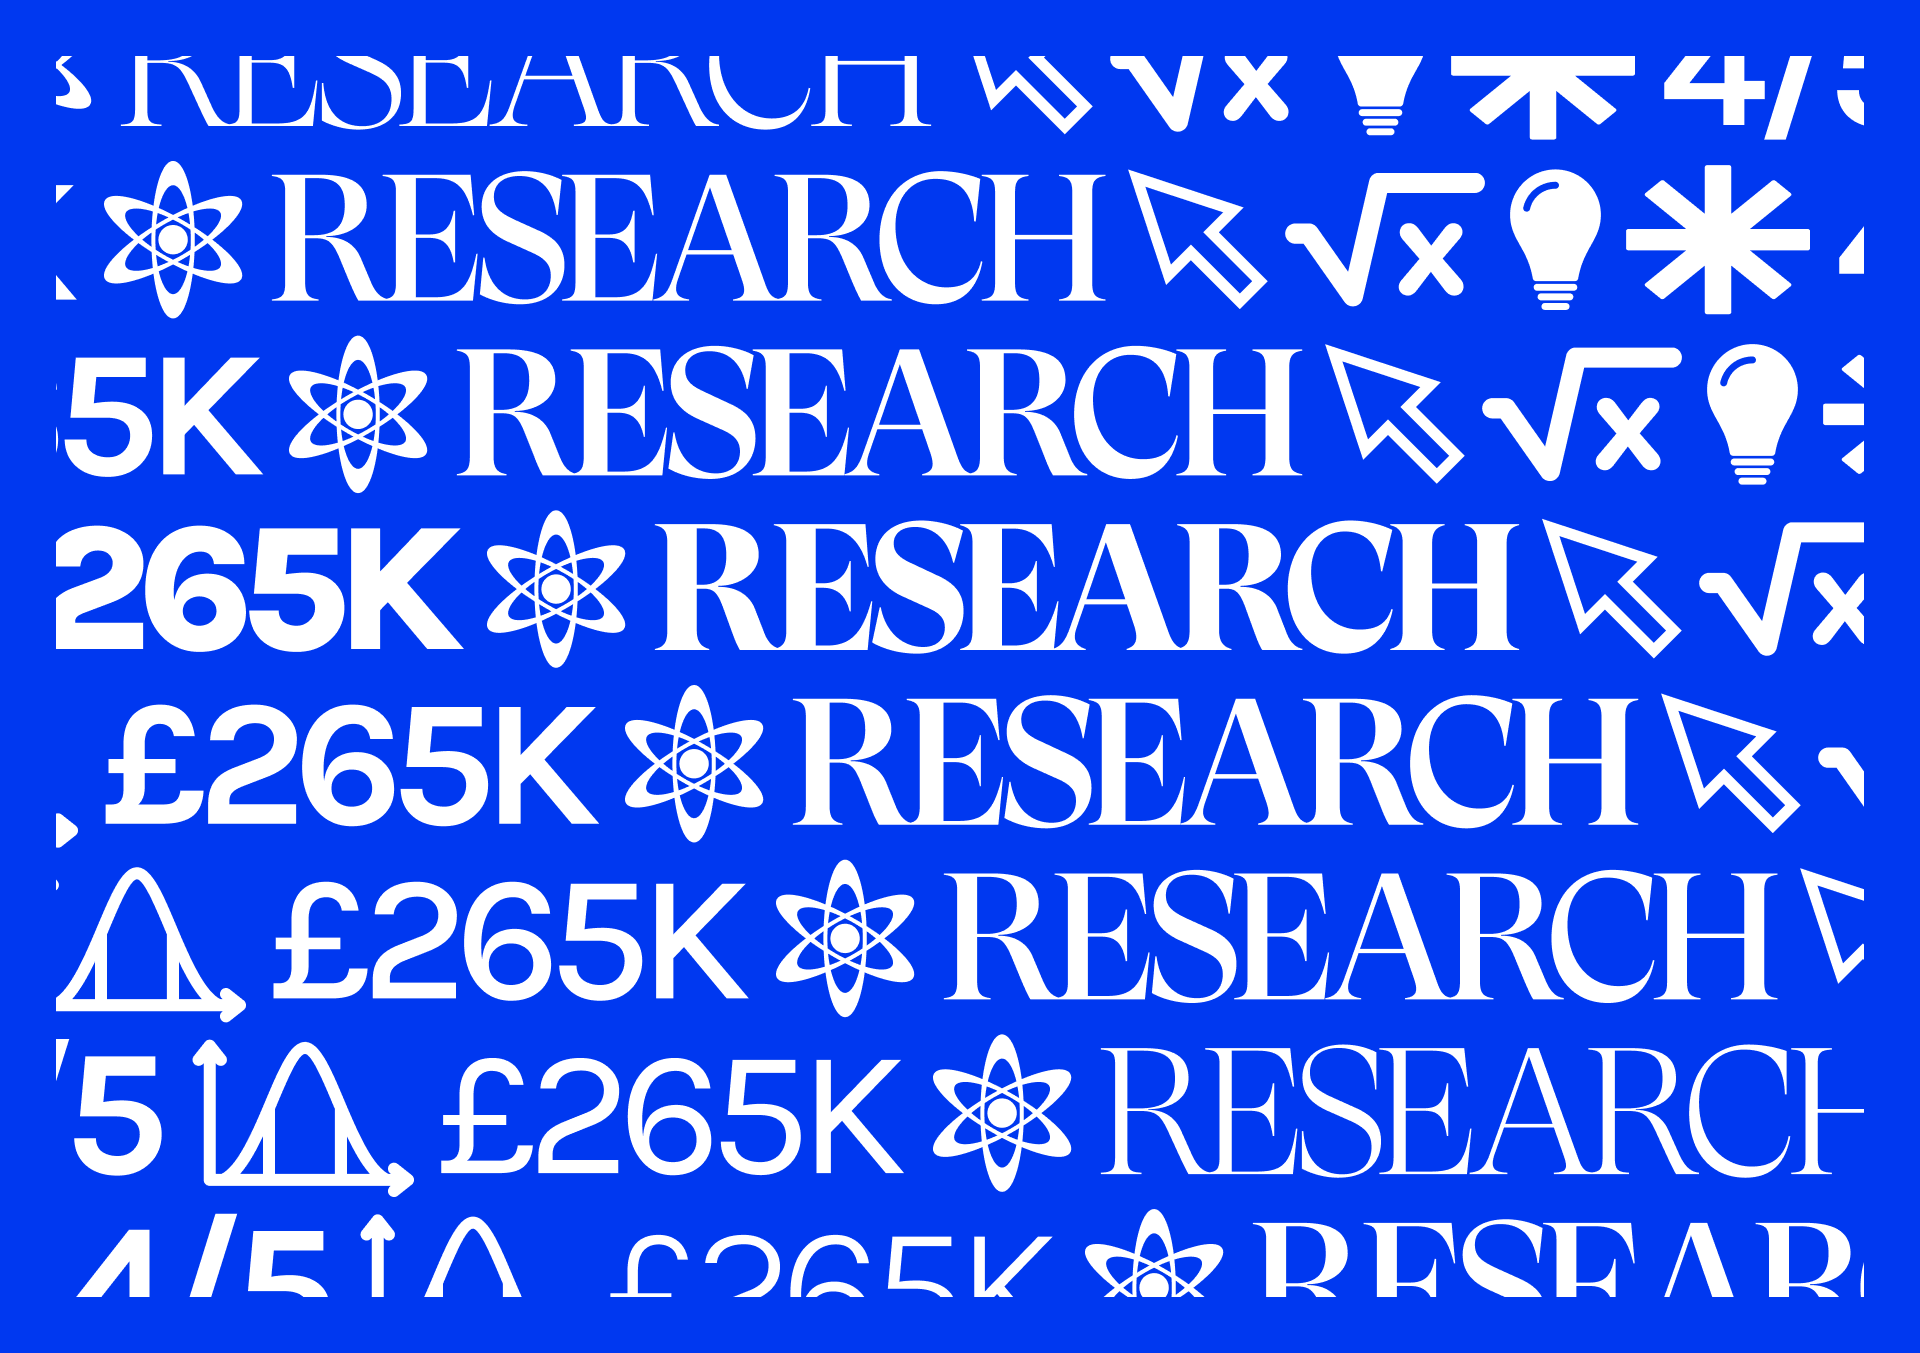 Visual representation of the Glue Workshop called Atomic Research Framework. Growth statistics and financial related figures are written on a blue coloured background